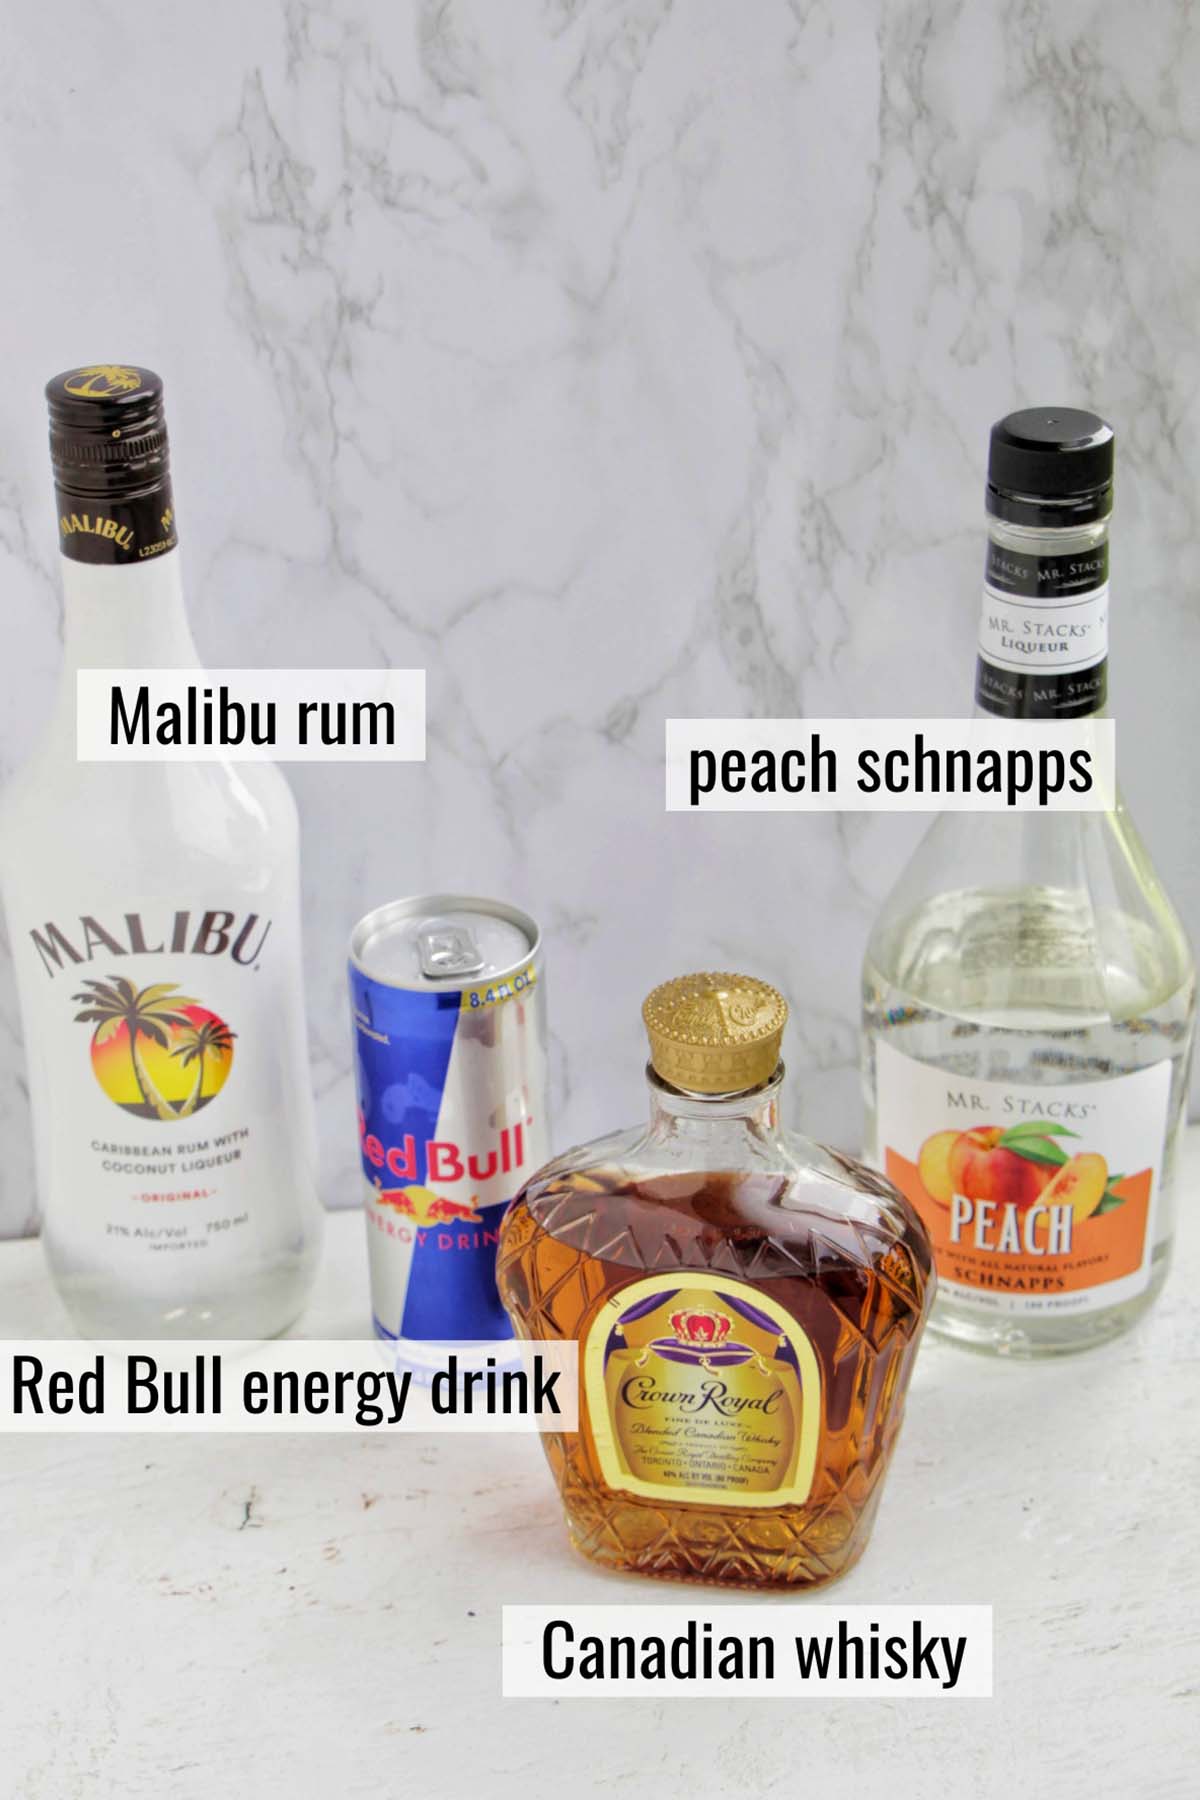 Vegas bomb shot ingredients with labels.